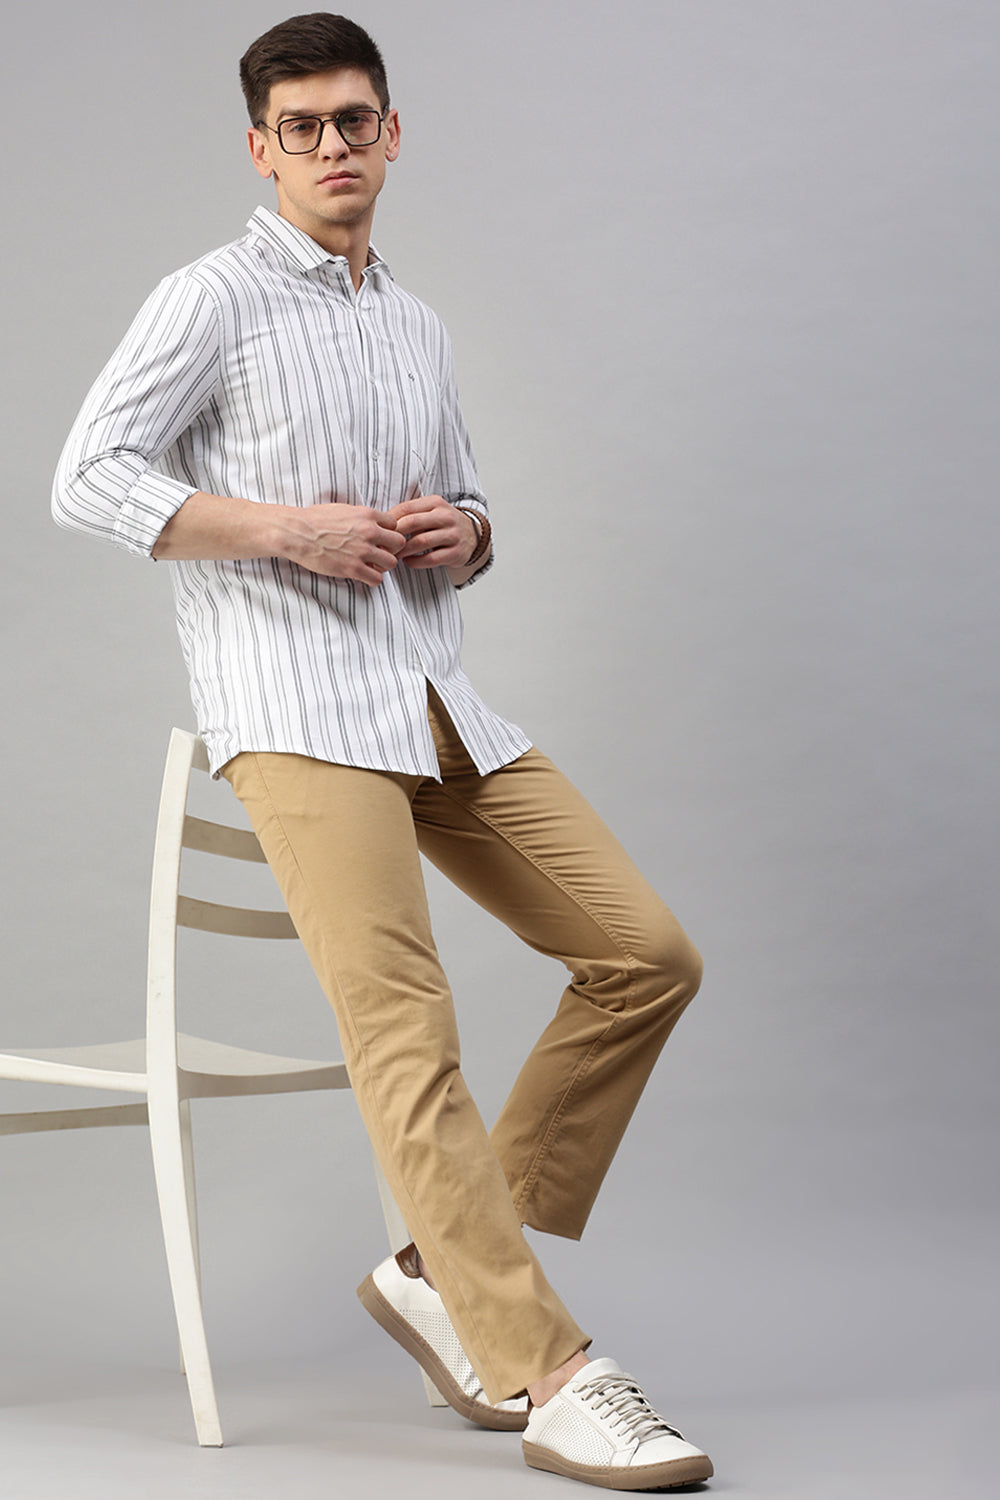 Classic Polo Men's Cotton Full Sleeve Striped Slim Fit Polo Neck White Color Woven Shirt | So1-127 A